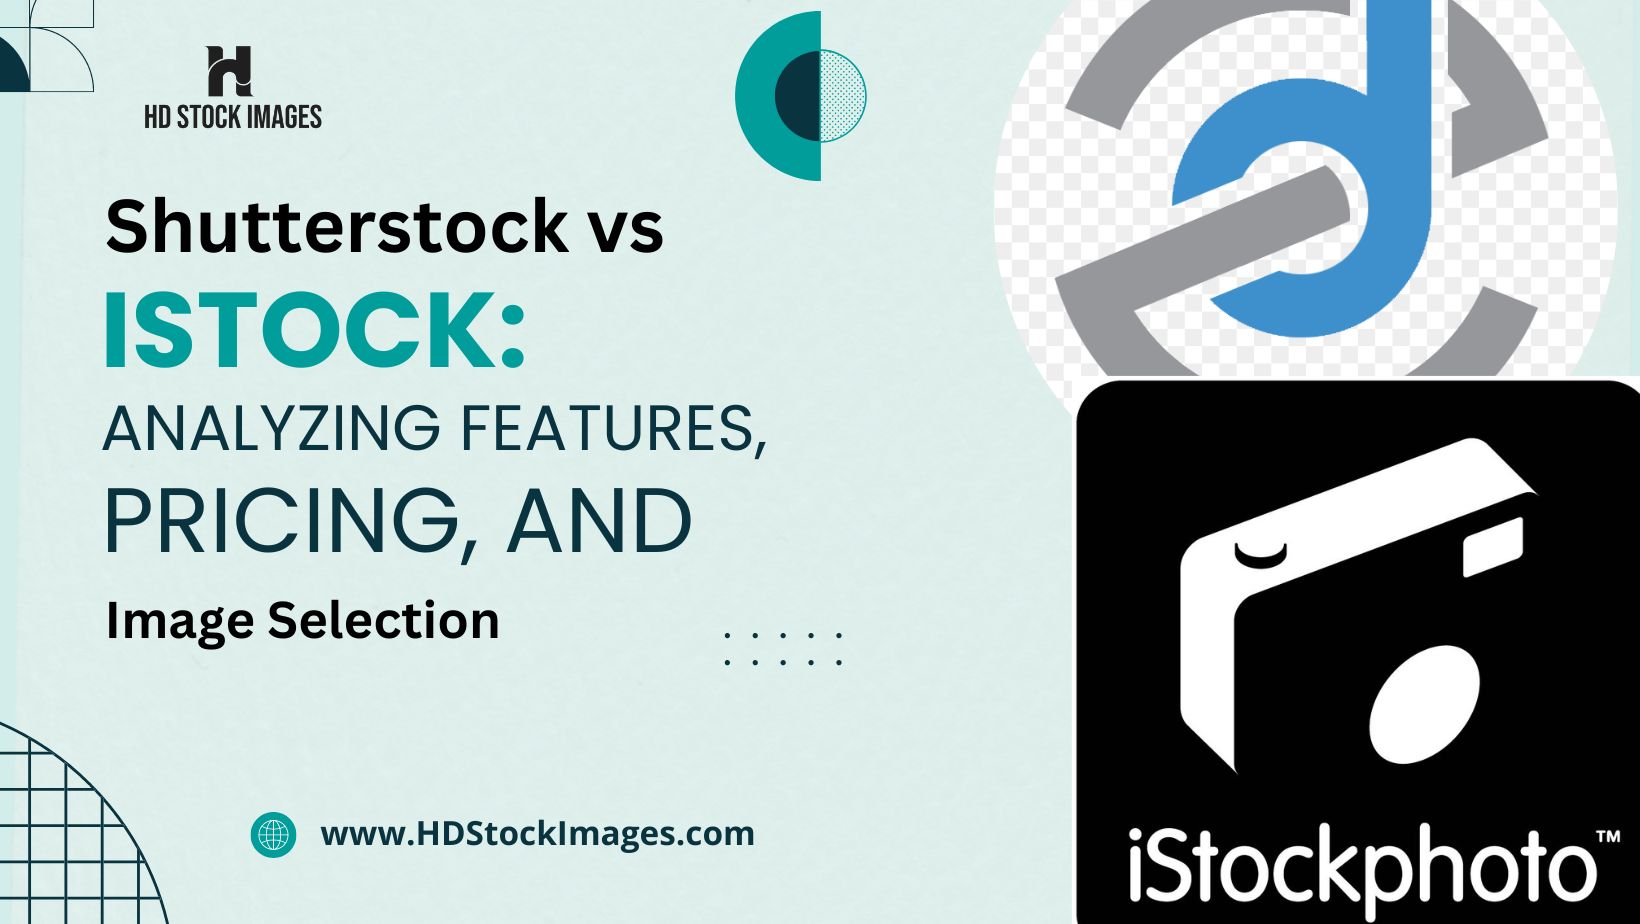 An image of Shutterstock vs iStock: Analyzing Features, Pricing, and Image Selection